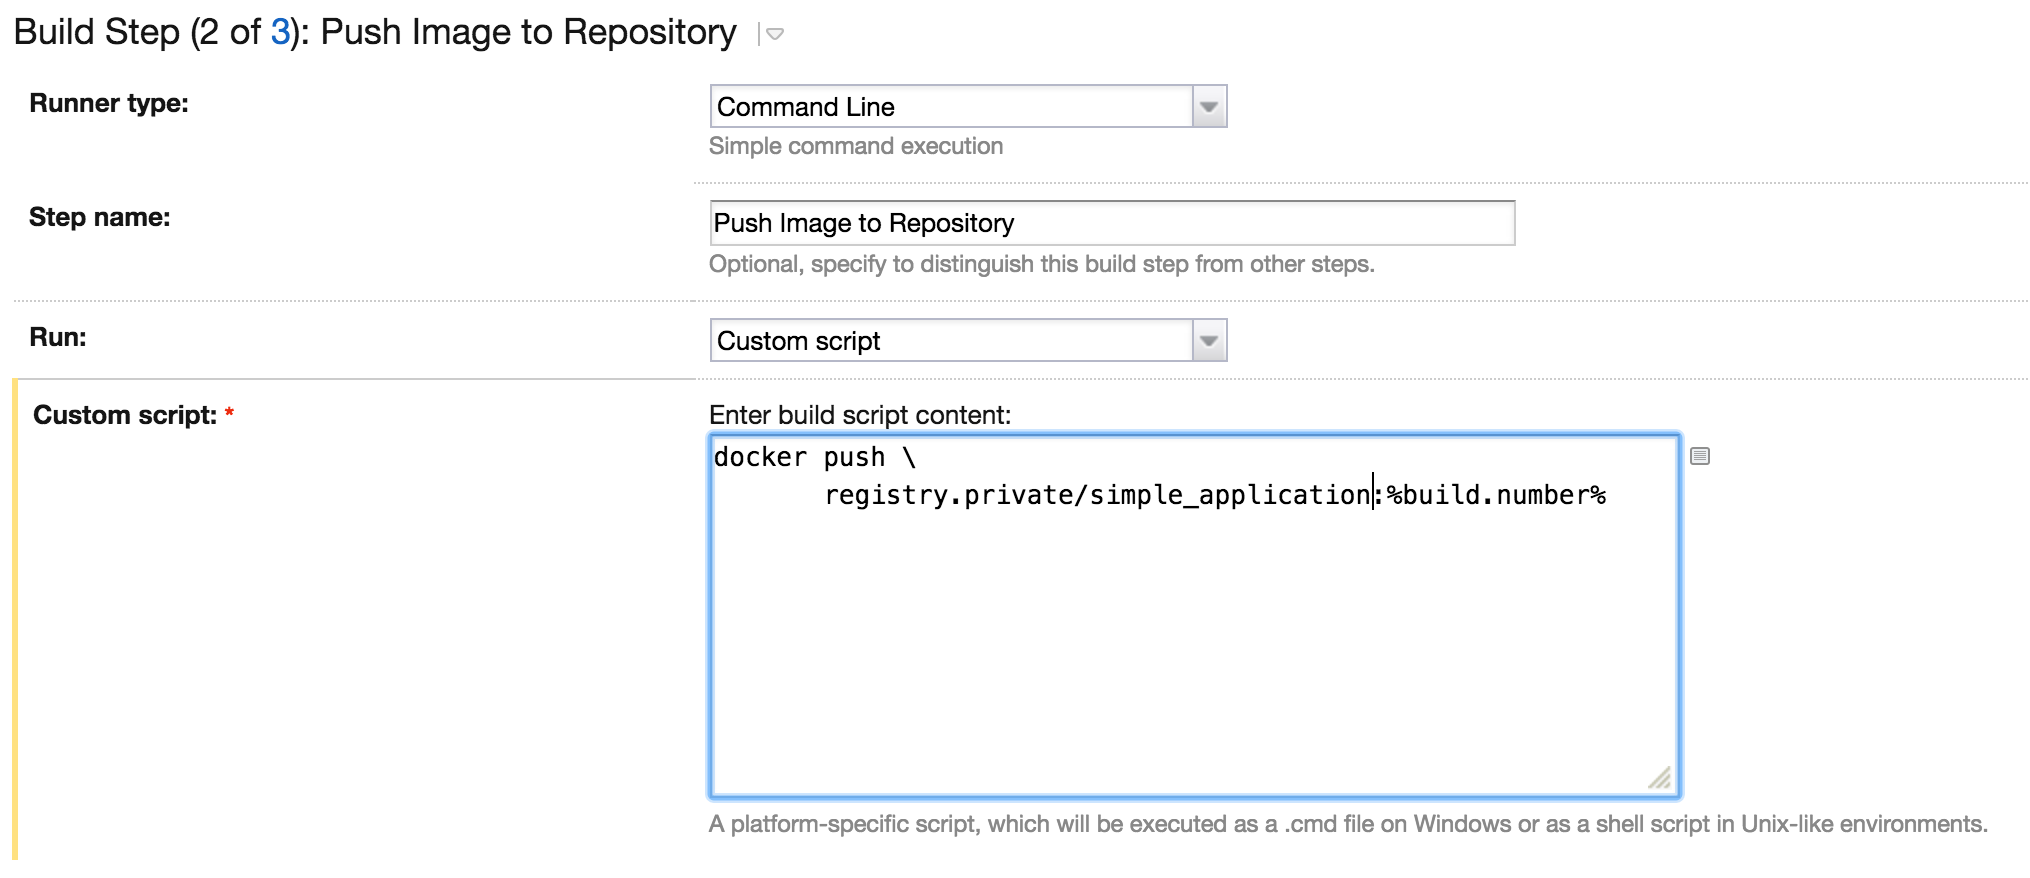 Release Push Image to Repository Step